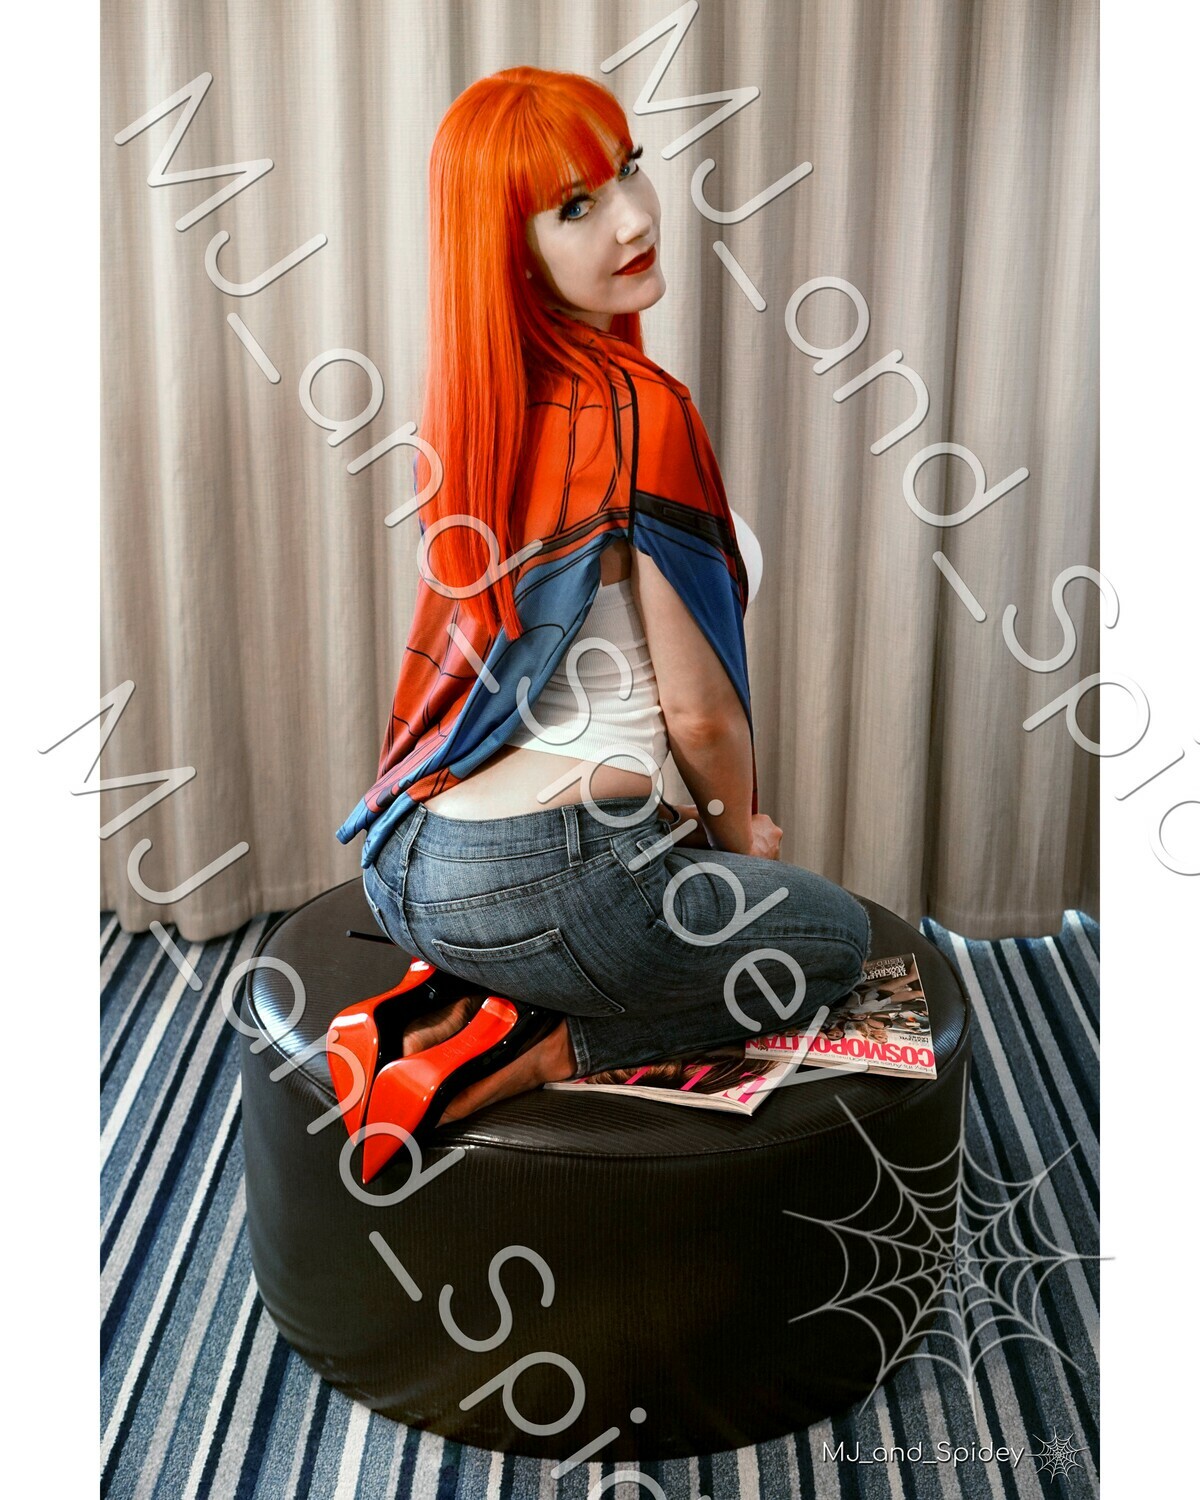 Marvel - Spider-Man - Mary Jane Watson - Campbell 4 -  Cosplay Print (@MJ_and_Spidey, MJ and Spidey, Comics)